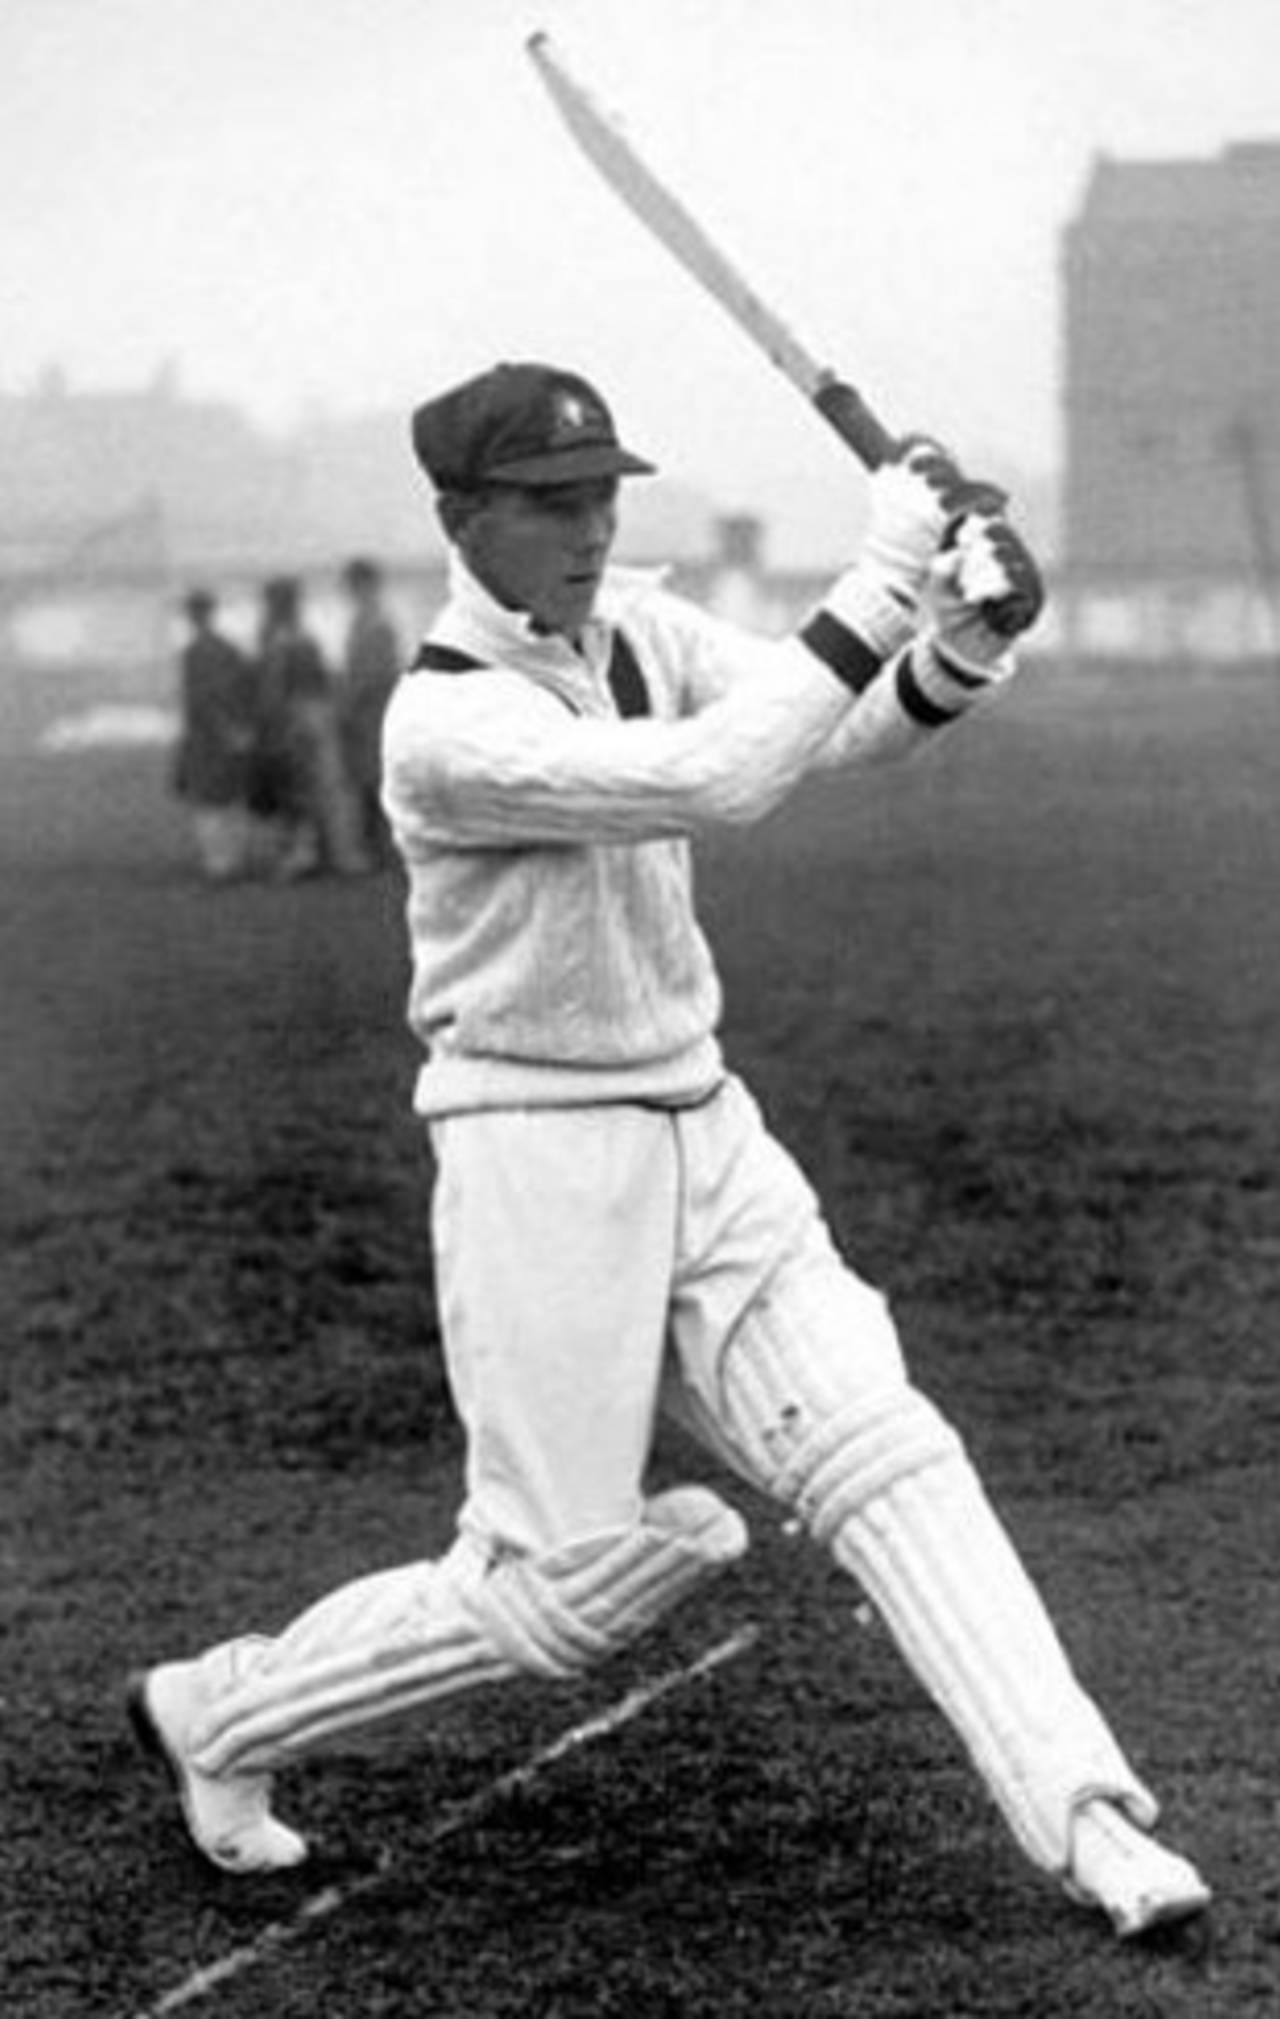 Archie Jackson practising at the start of the 1930 tour, April 28, 1930